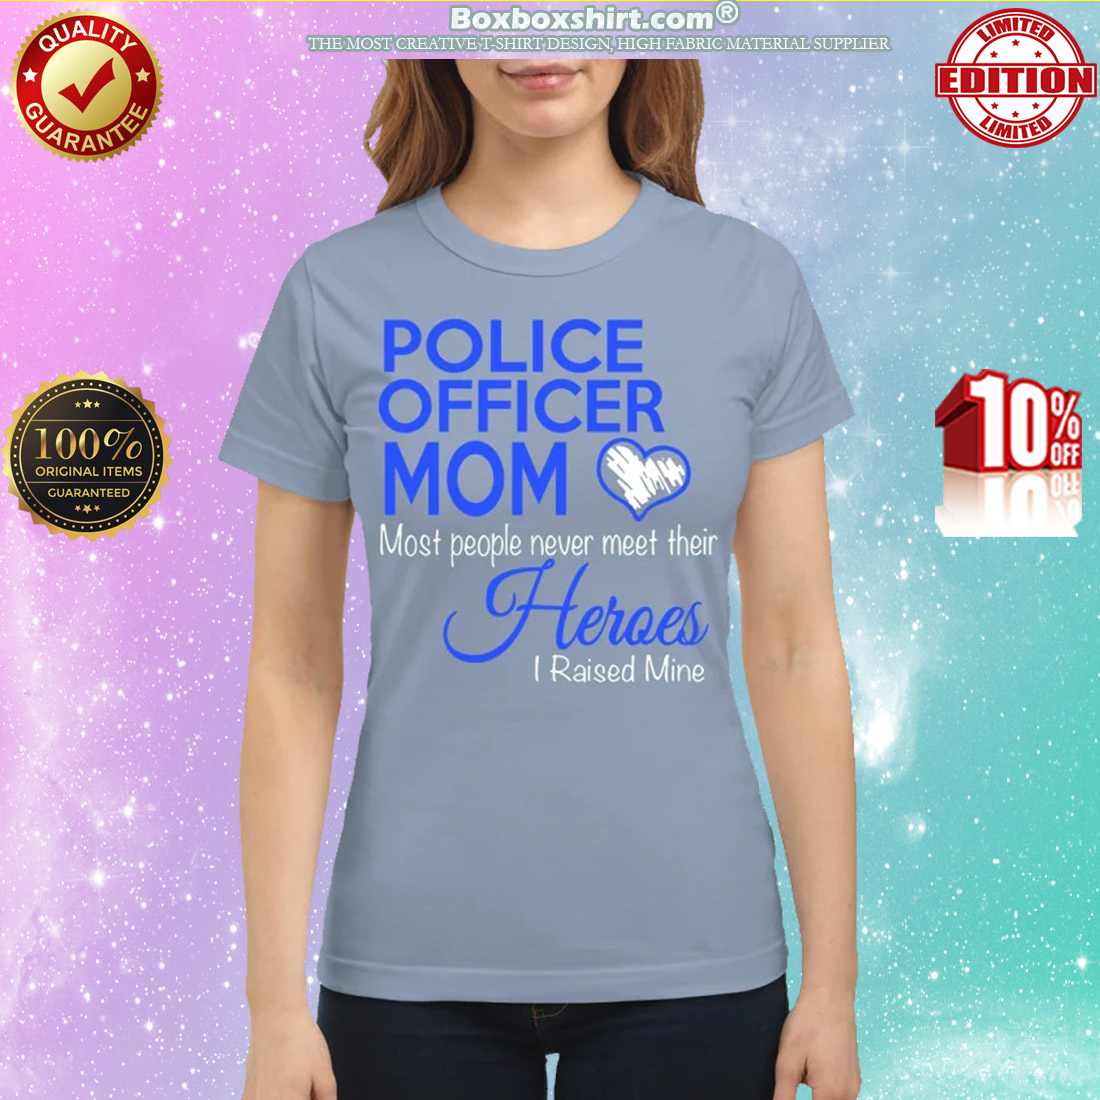 Police officer mom most people never meet their heroes i raised mine classic shirt